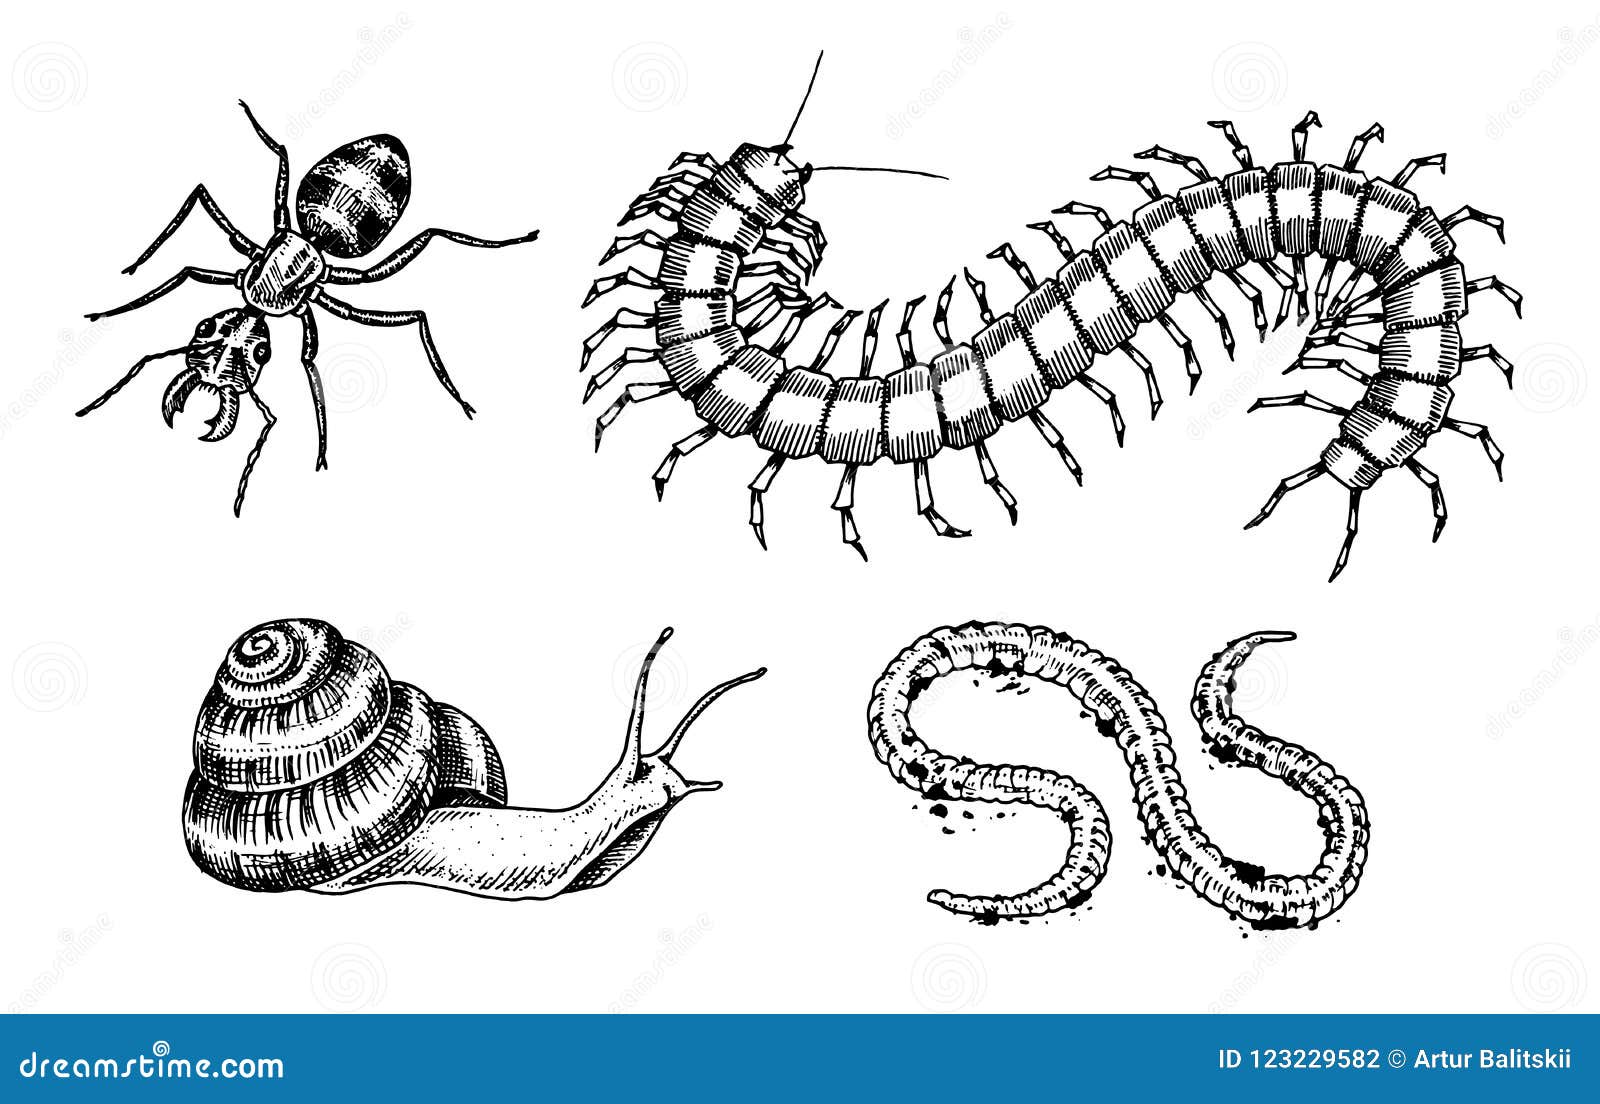 Big Set of Insects. Bugs Beetles Snail, Worm Centipede Ant Scolopendra  Tattoo. Vintage Pets in House Stock Vector - Illustration of caterpillar,  hand: 123229582